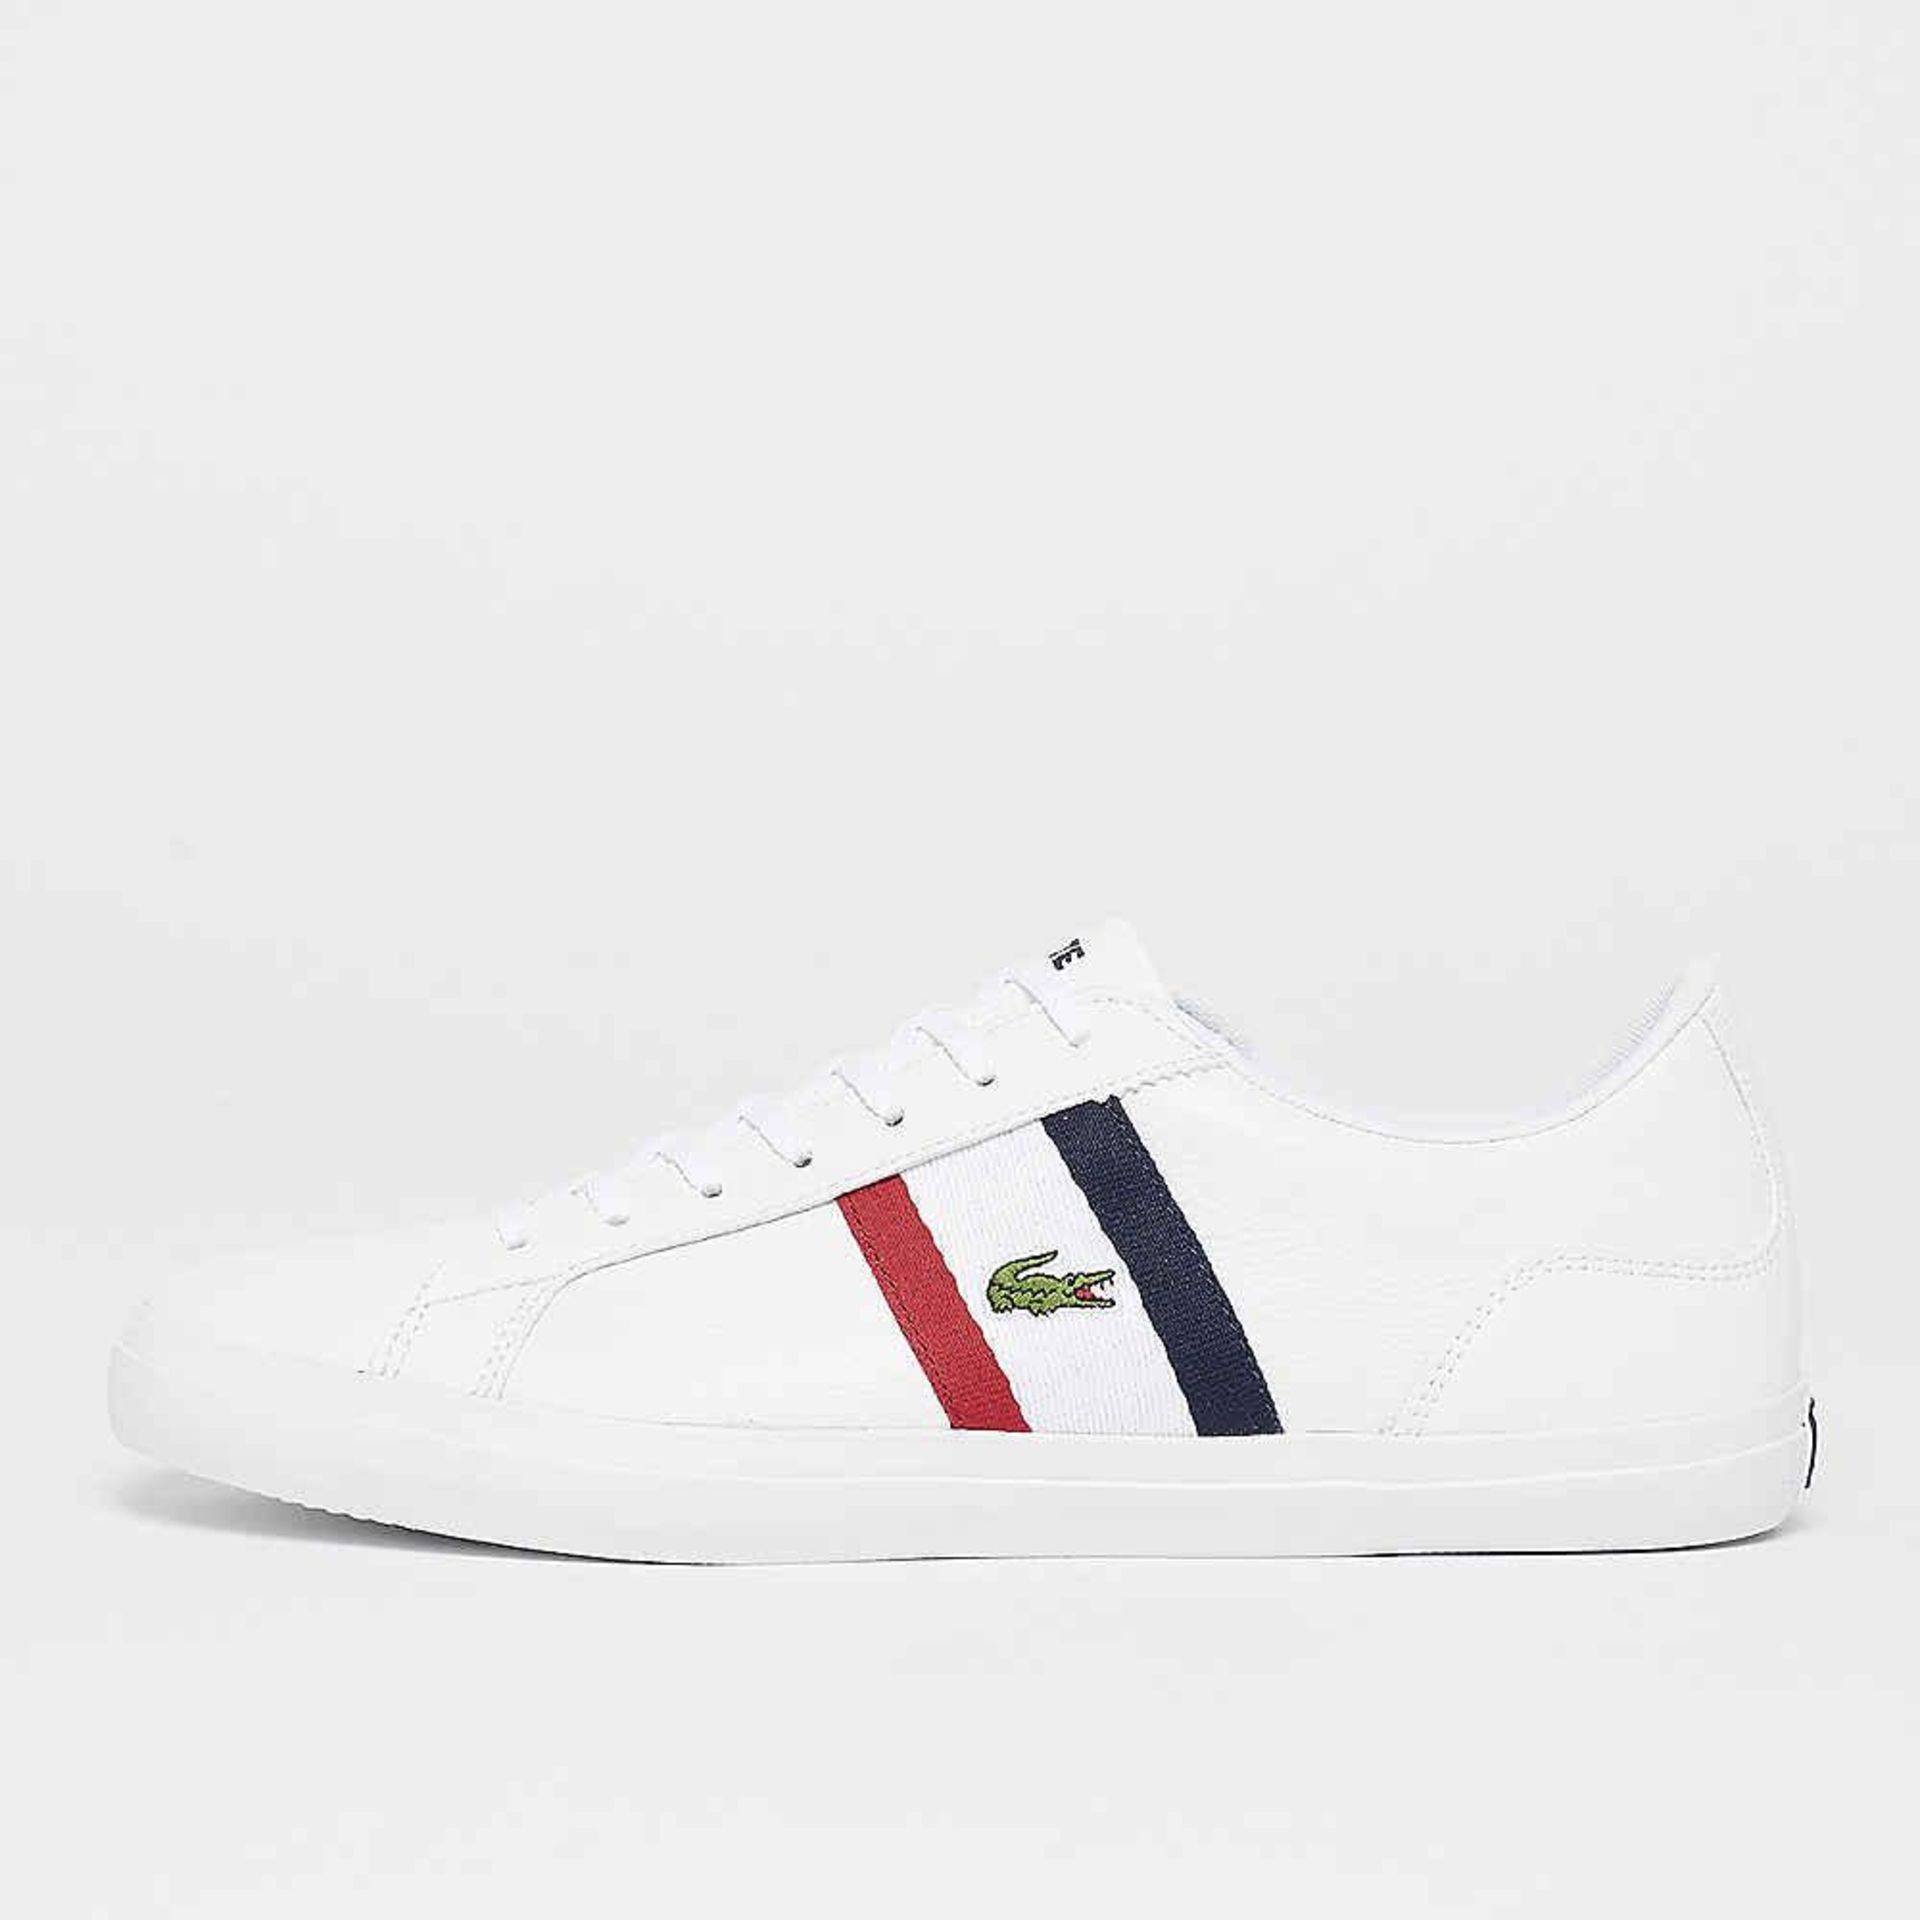 + VAT Brand New Lacoste Trainers UK Size 6.5 - White Red Navy - Leather & Sythetic - EU Size 40 -